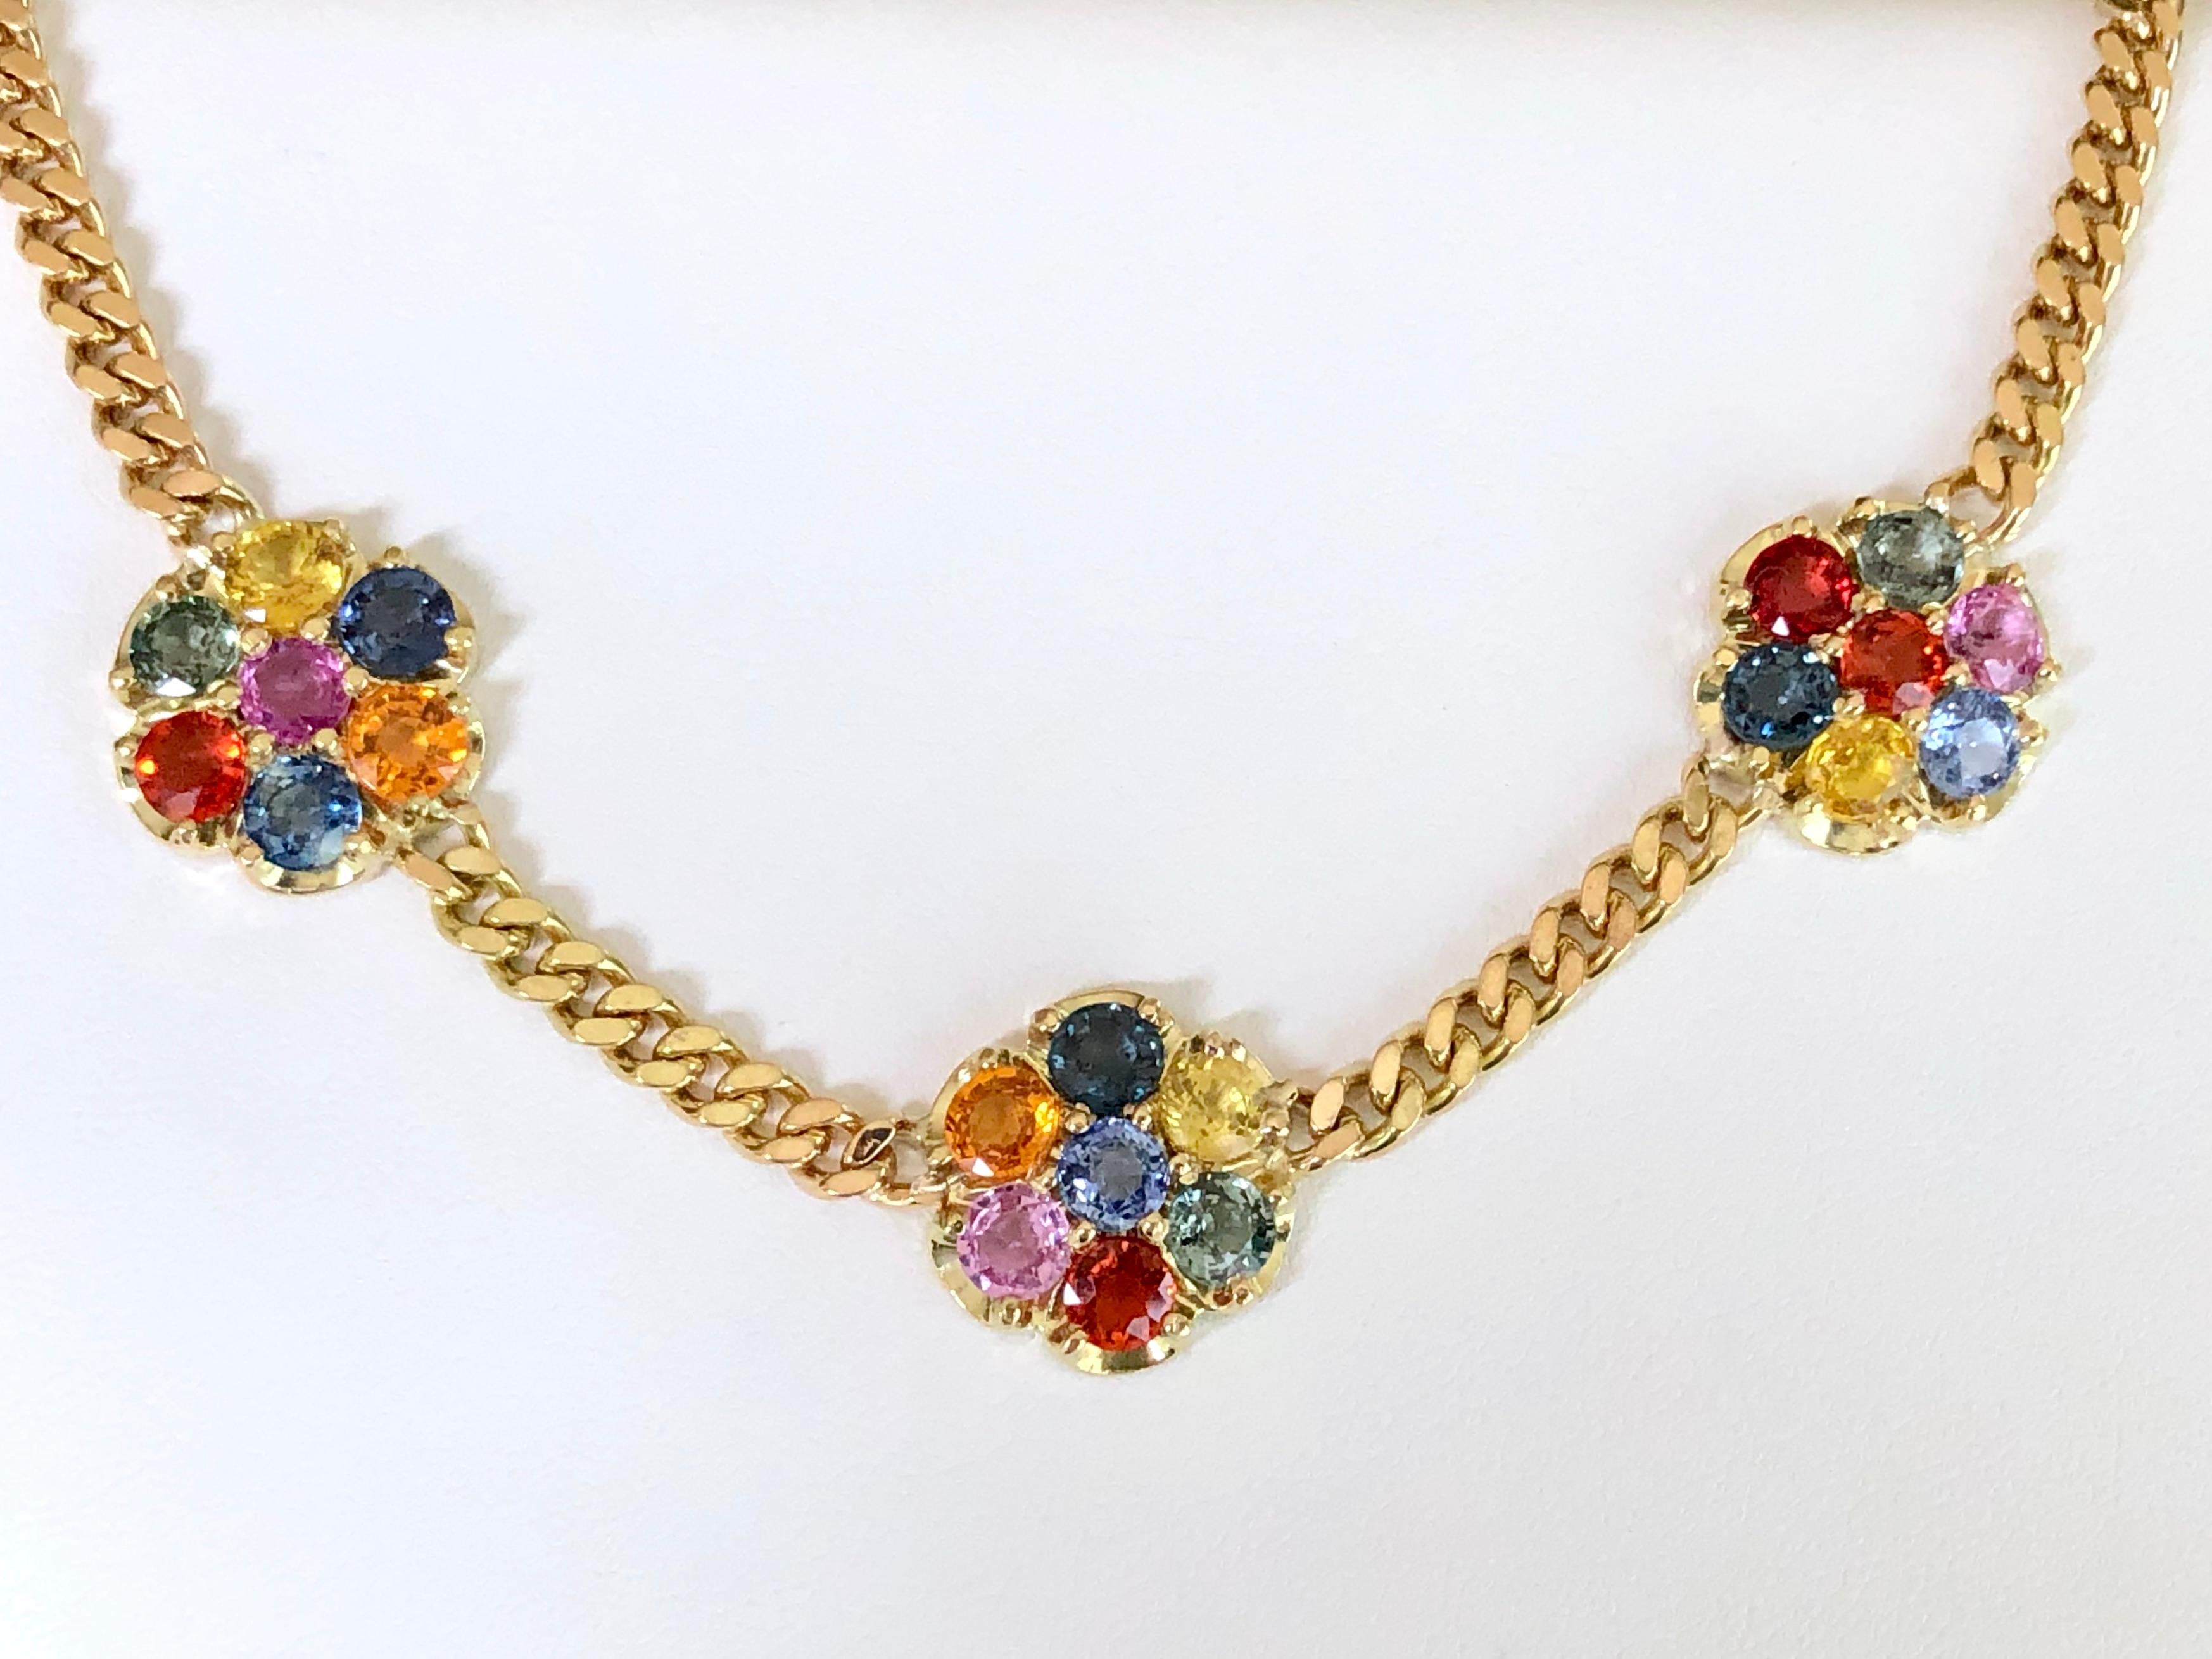 13.50 Carat Multicolor Sapphire Chain Link Necklace 18K
Remains of the most iconic collections!
The 18k yellow gold chain link necklace is set with three large flowers of various colors of natural faceted round sapphires in bright pink, blue, green,